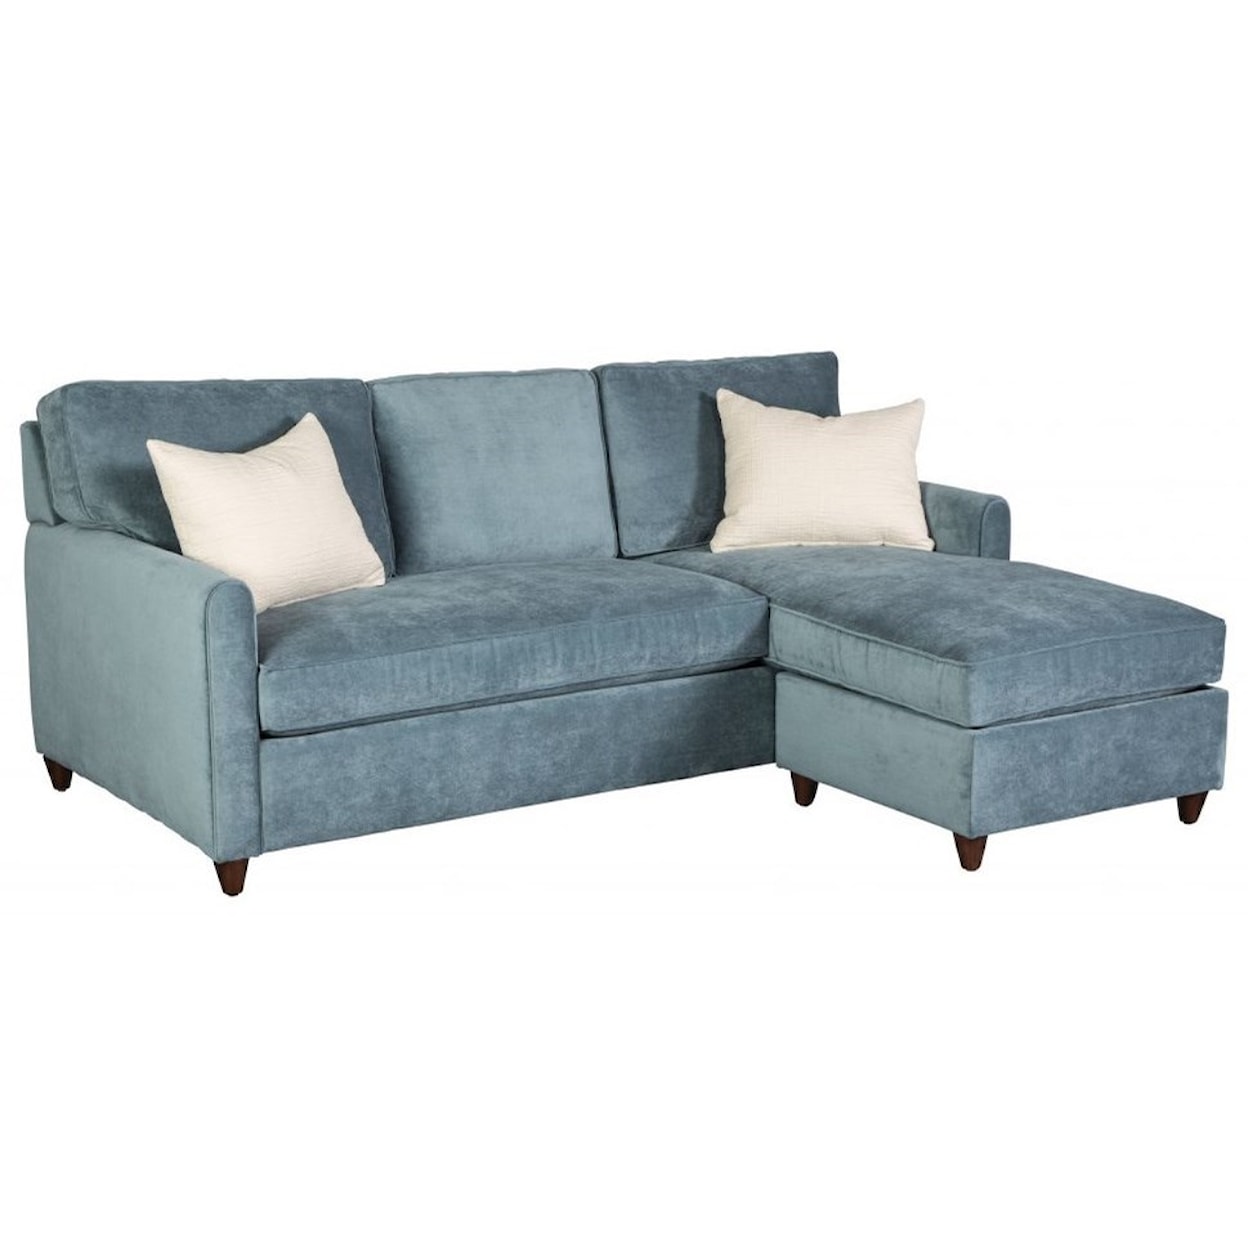 Jonathan Louis Emory Sofa with Chaise